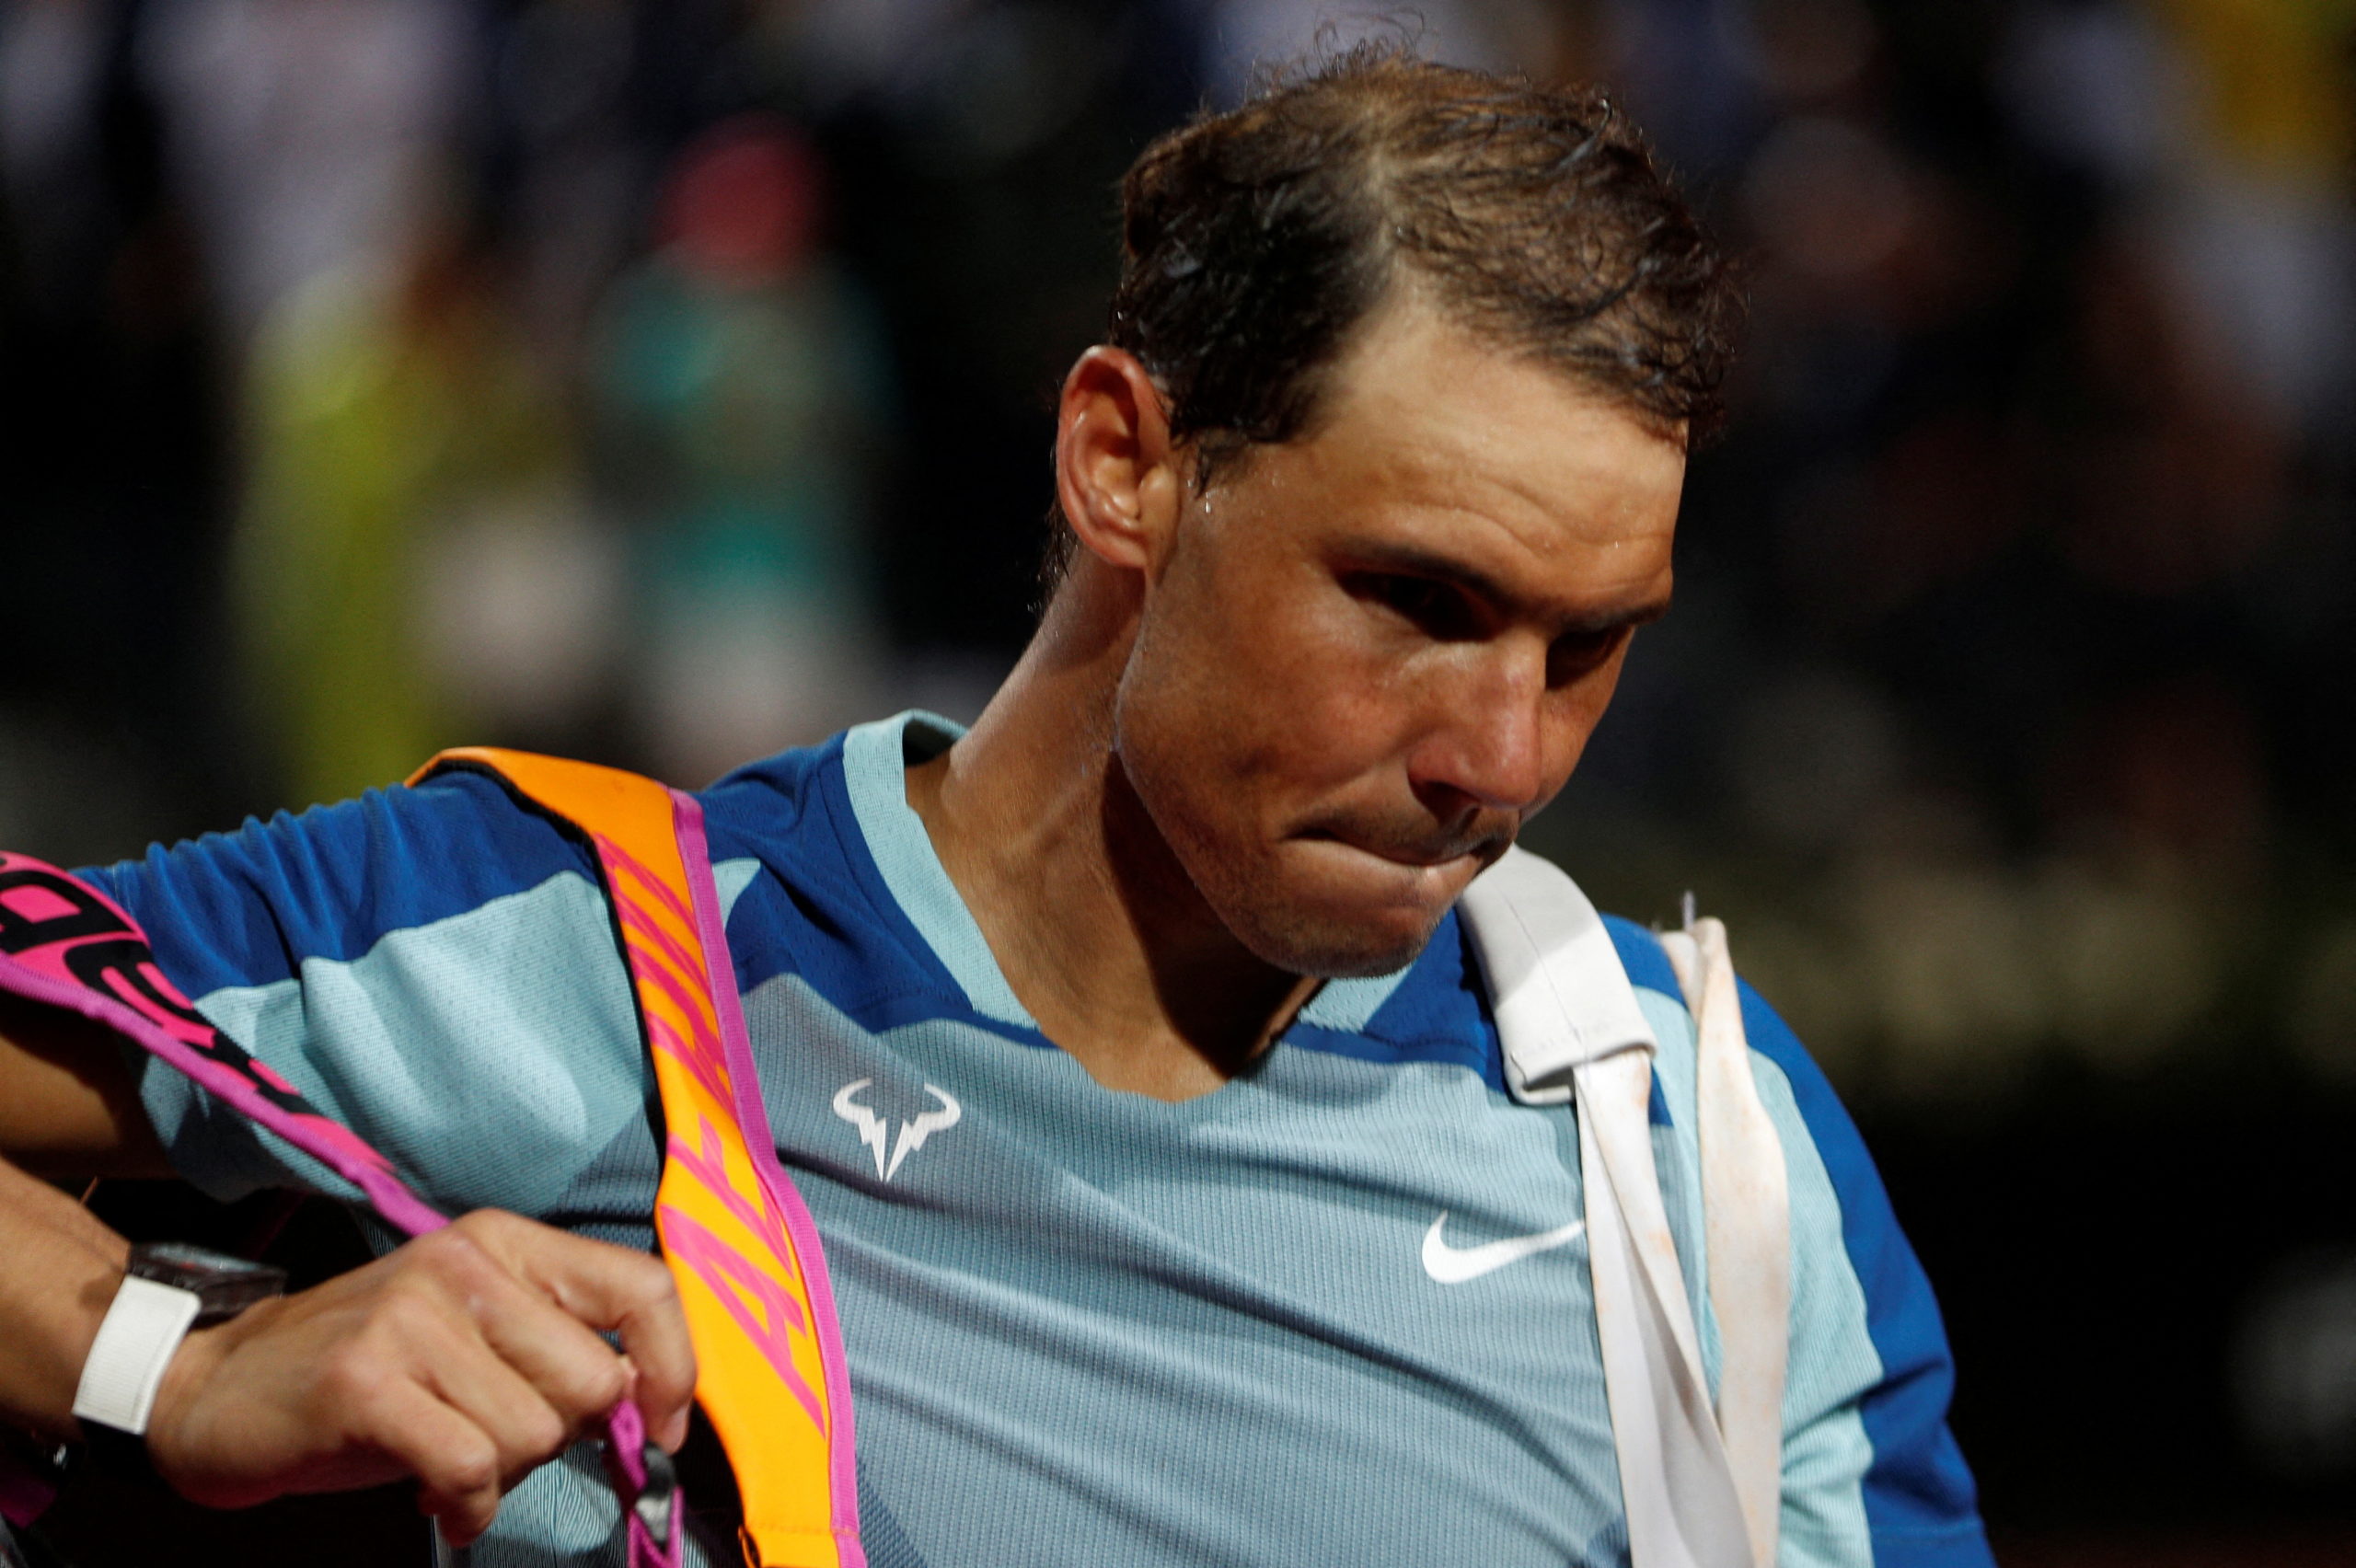 FILE PHOTO: Tennis - ATP Masters 1000 - Italian Open - Foro Italico, Rome, Italy - May 12, 2022 Spain's Rafael Nadal leaves court after losing his third round match against Canada's Denis Shapovalov REUTERS/Guglielmo Mangiapane/File Photo